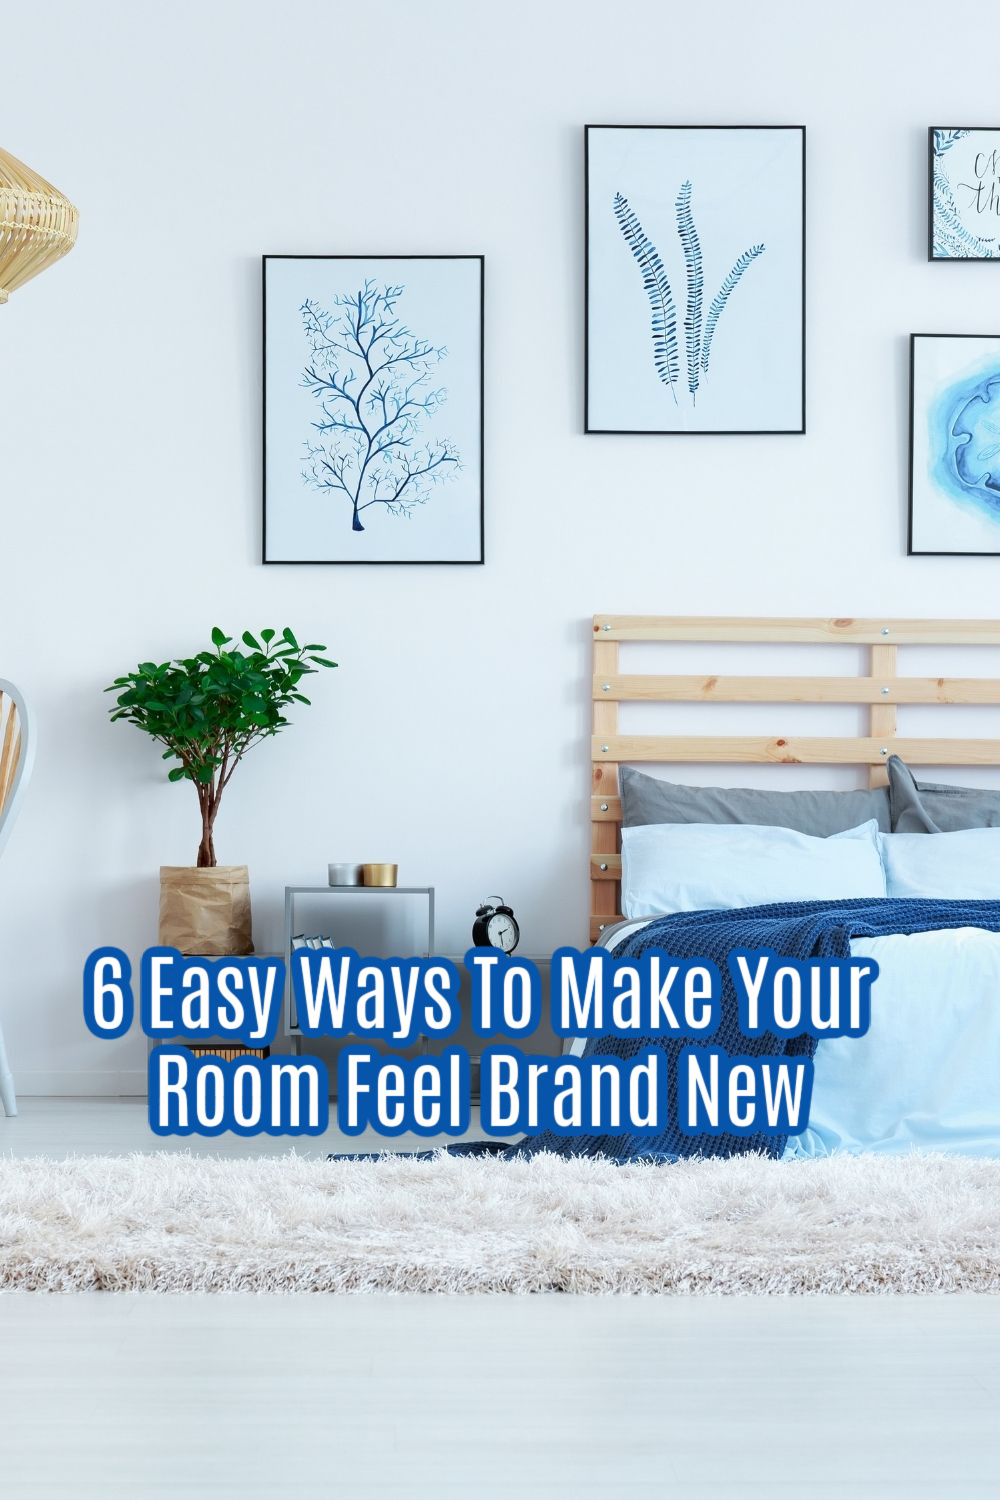 6 Easy Ways To Make Your Room Feel Brand New